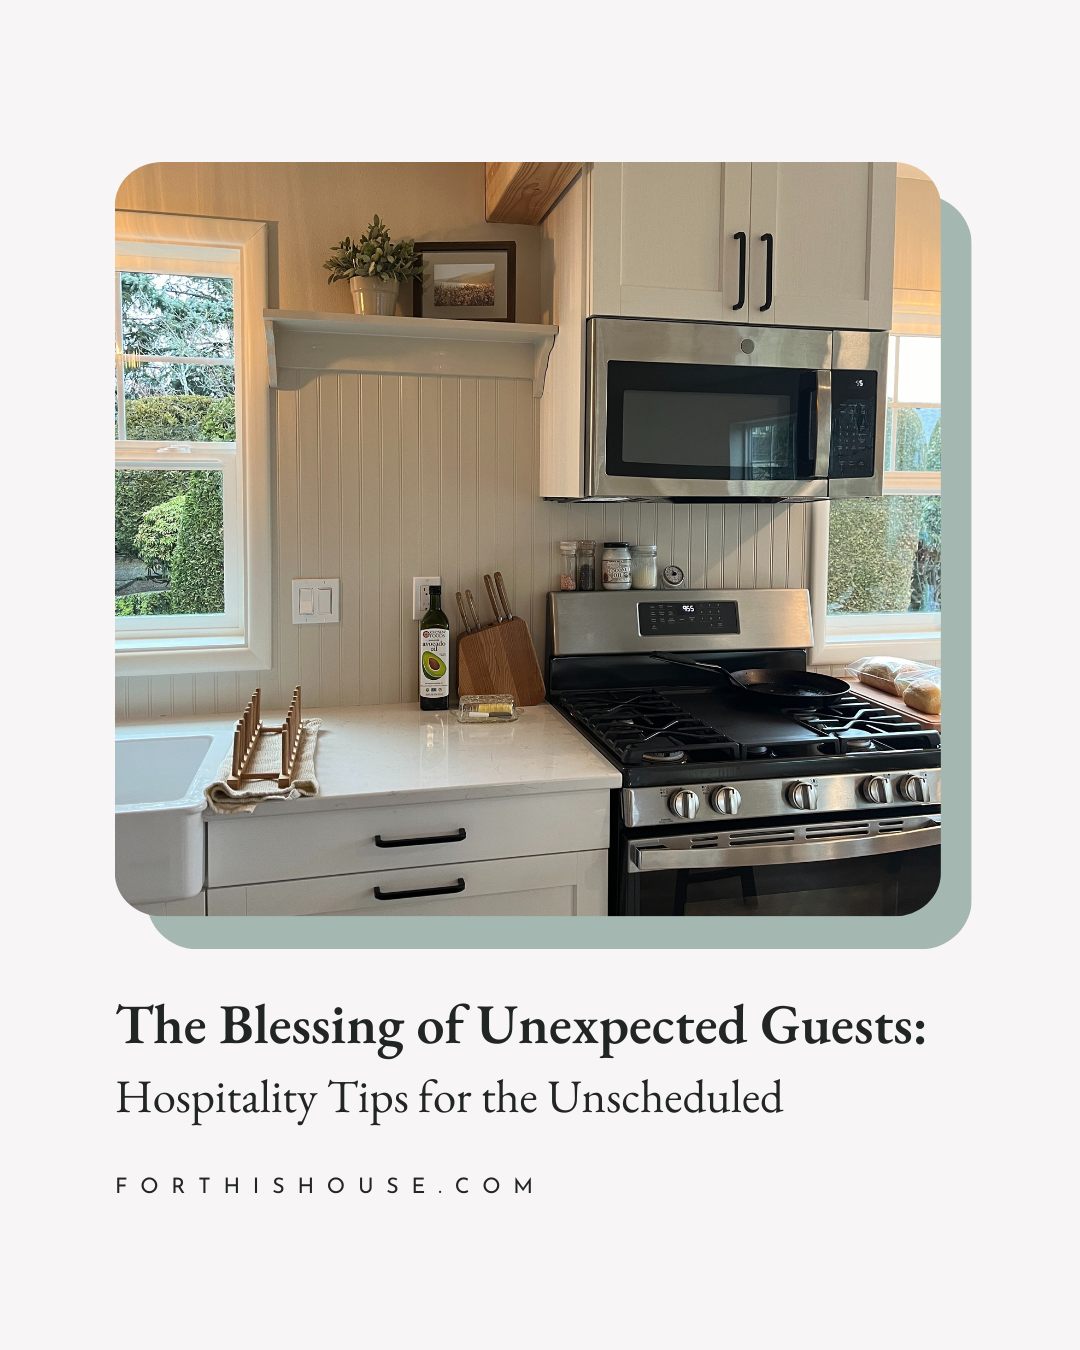 The blessing of unexpected guests